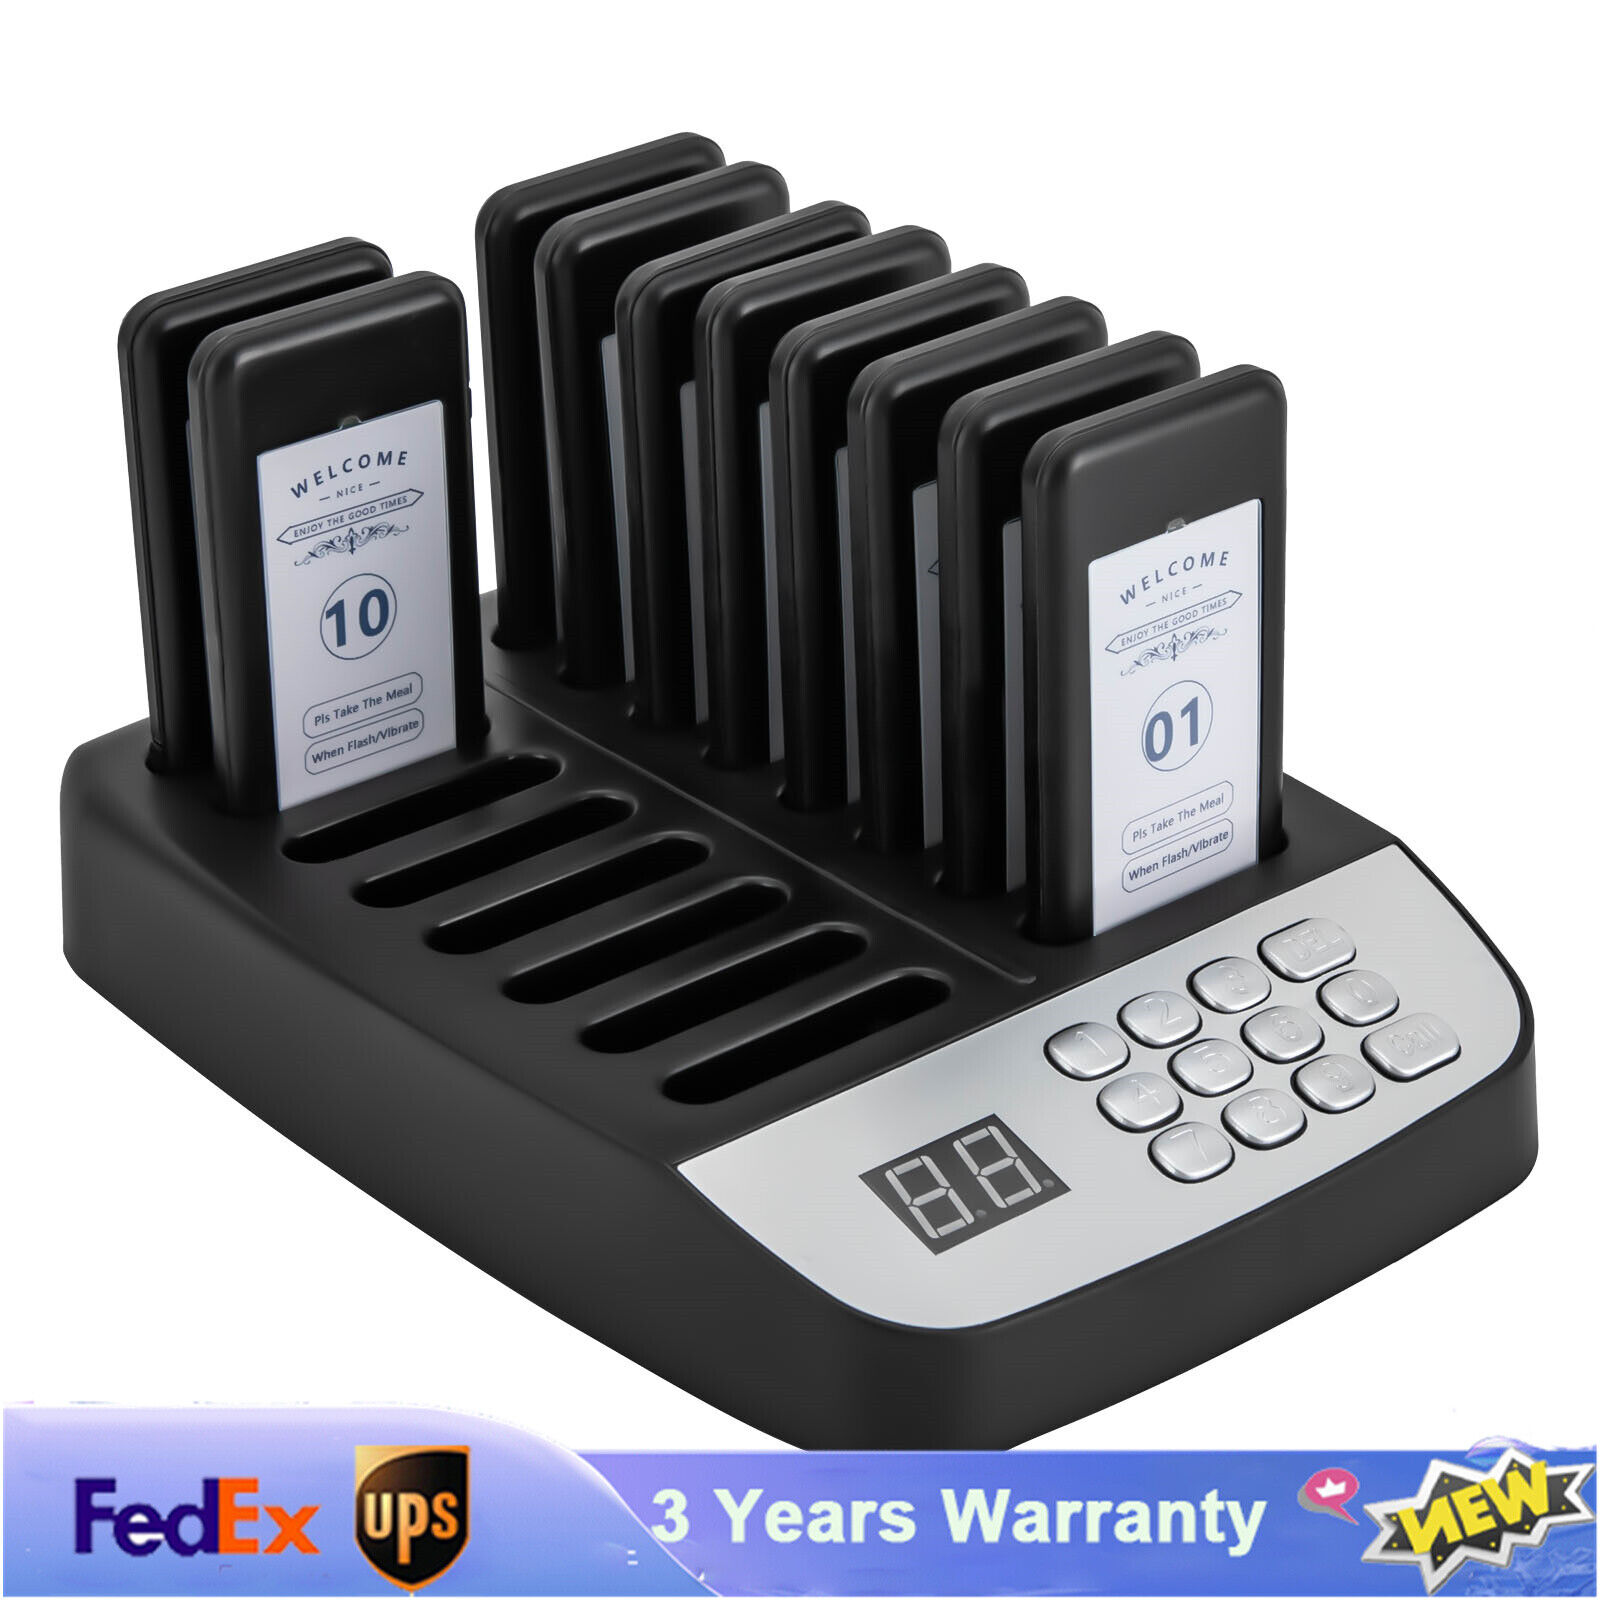 Restaurant Wireless Guest Paging System 10 Beepers Queuing Calling Pager Food